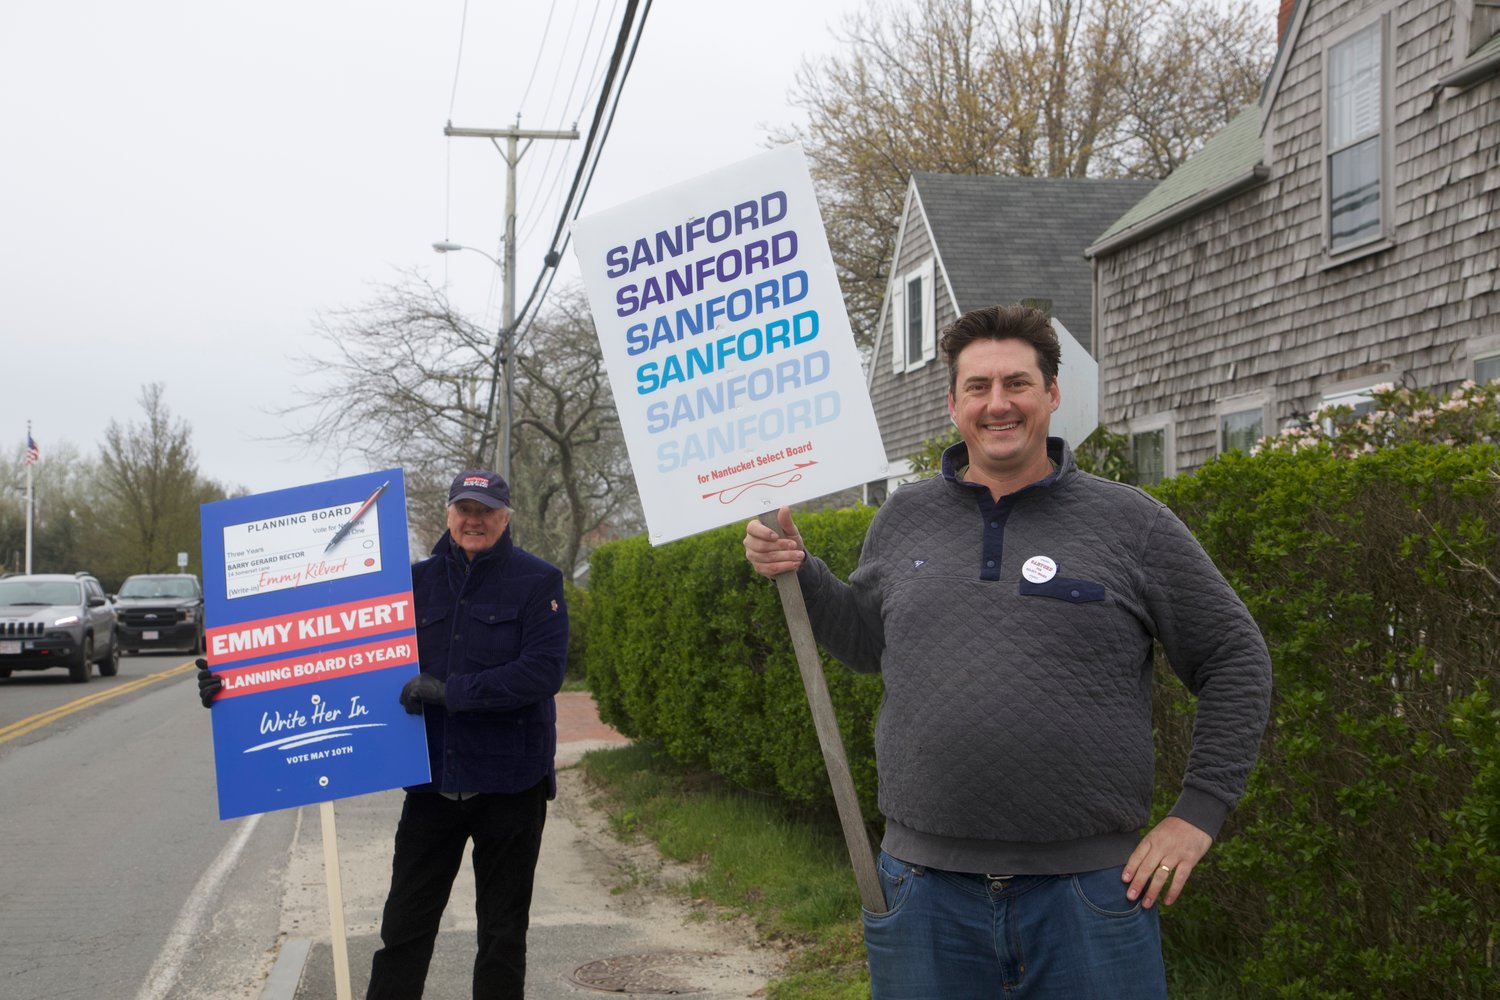 Henry Sanford said he wasn't sure if he would run for Select Board again next year.